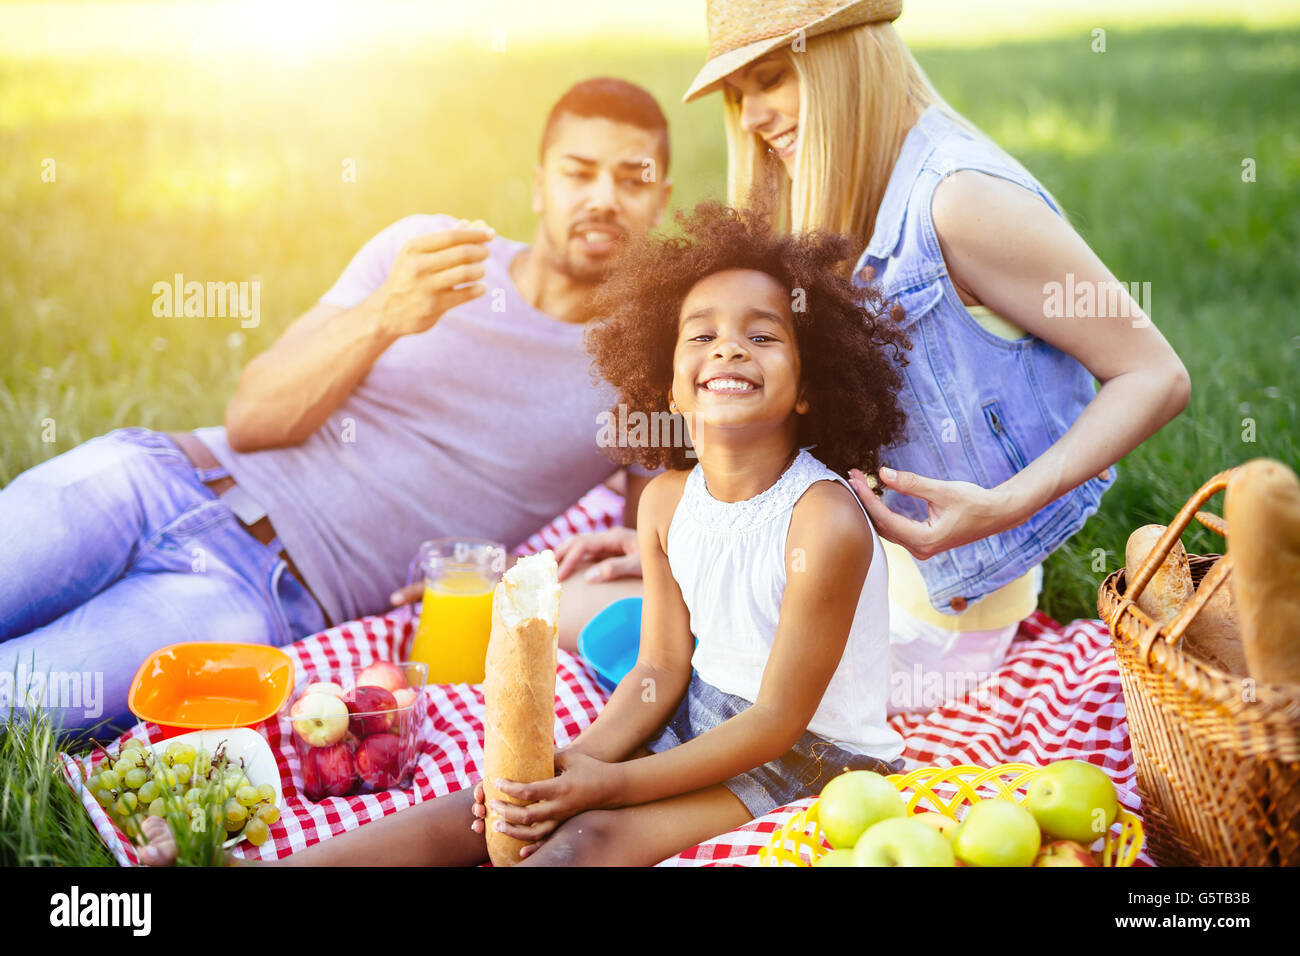 Family picnicking outdoors with their cute daughter Stock Photo